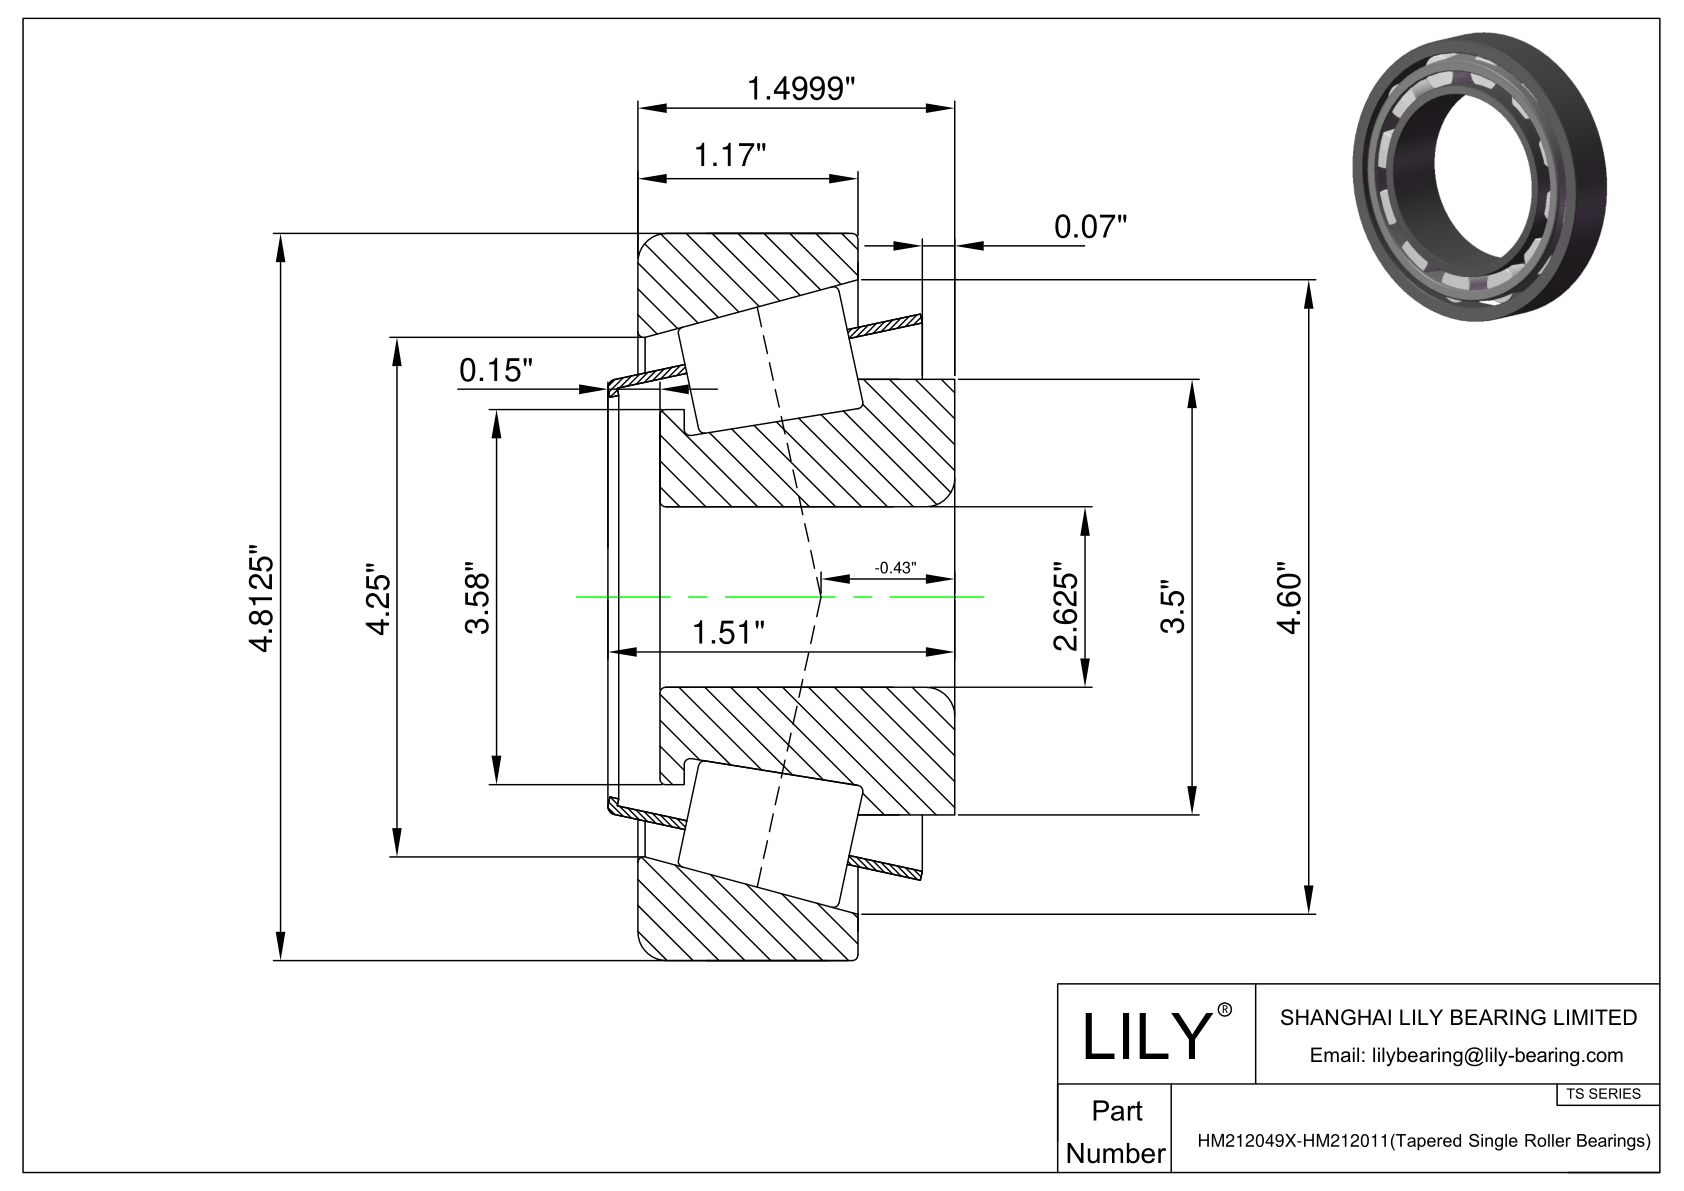 HM212049X-HM212011 TS (Tapered Single Roller Bearings) (Imperial) cad drawing